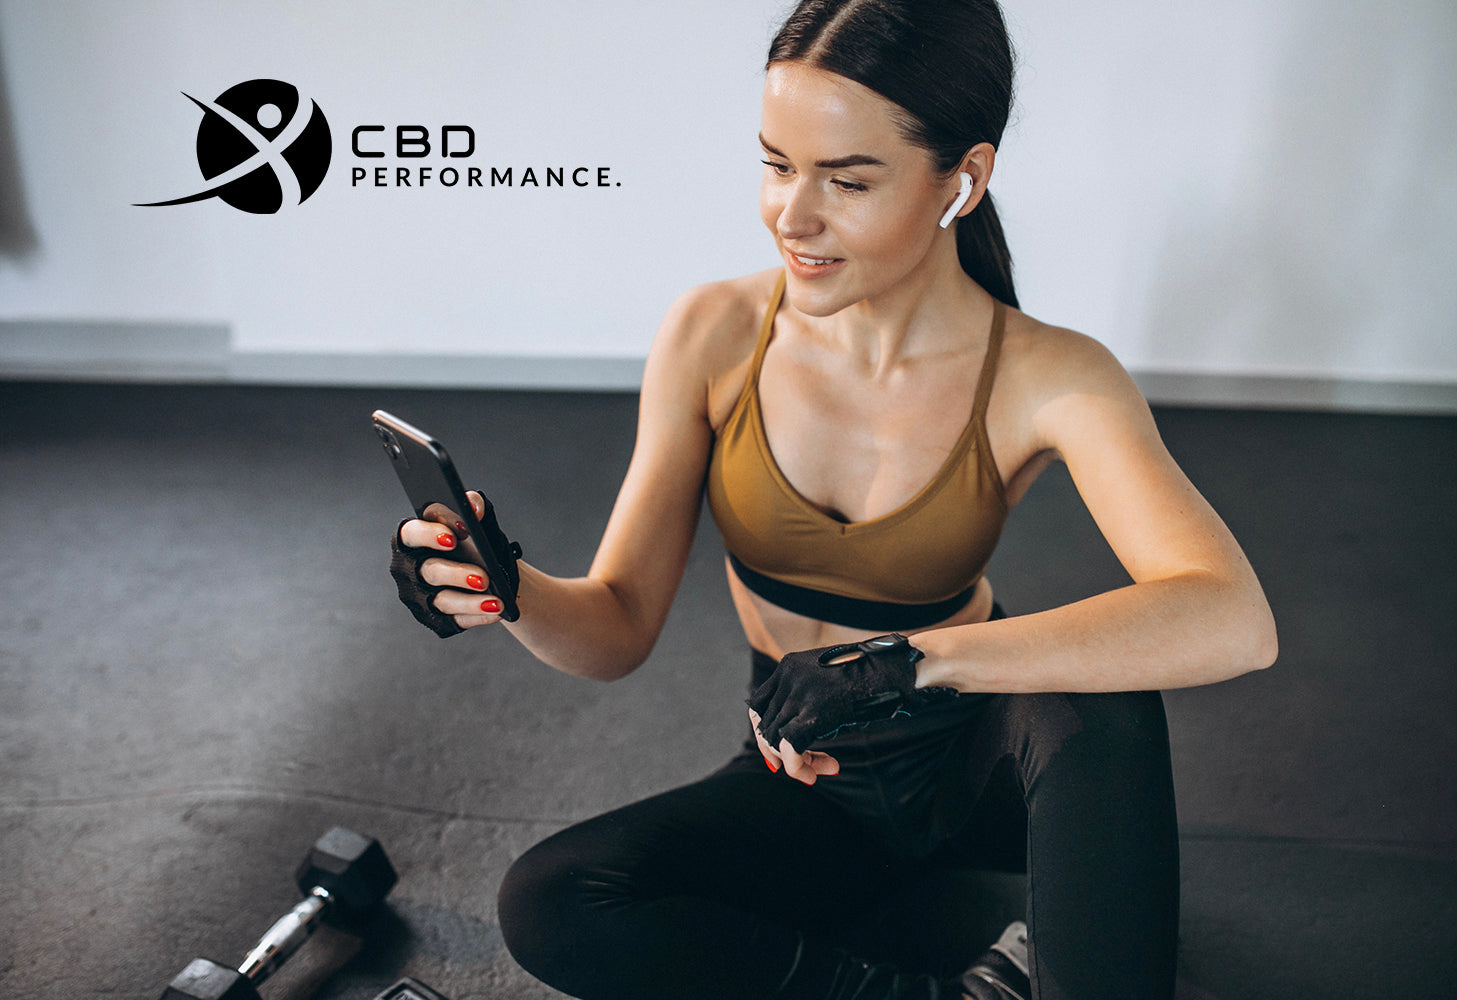 CBD performance in the gym